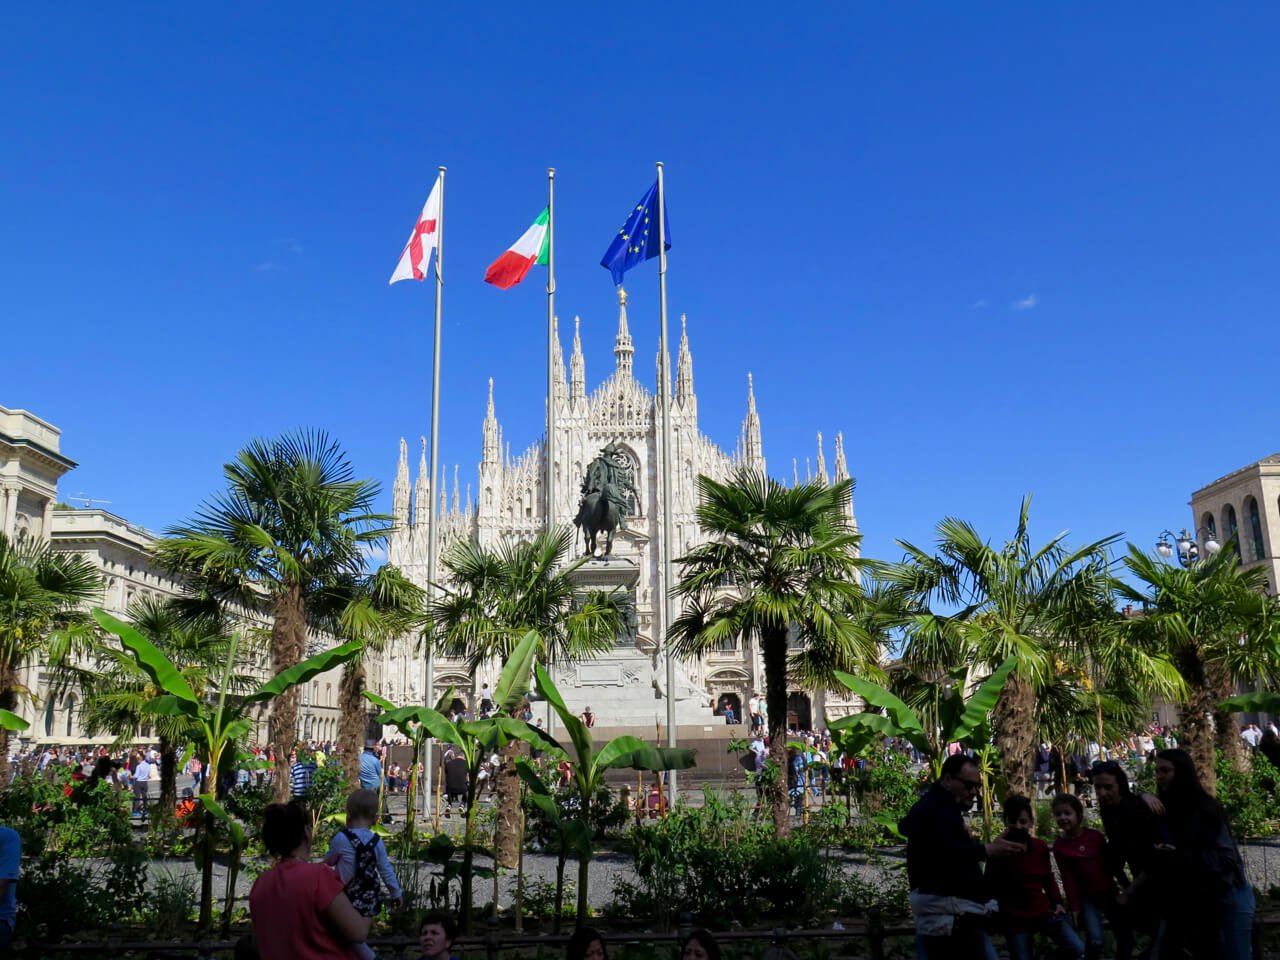 Starbucks' controversial palm trees in front of the Duomo in Milan, Italy. ©KettiWilhelm2017